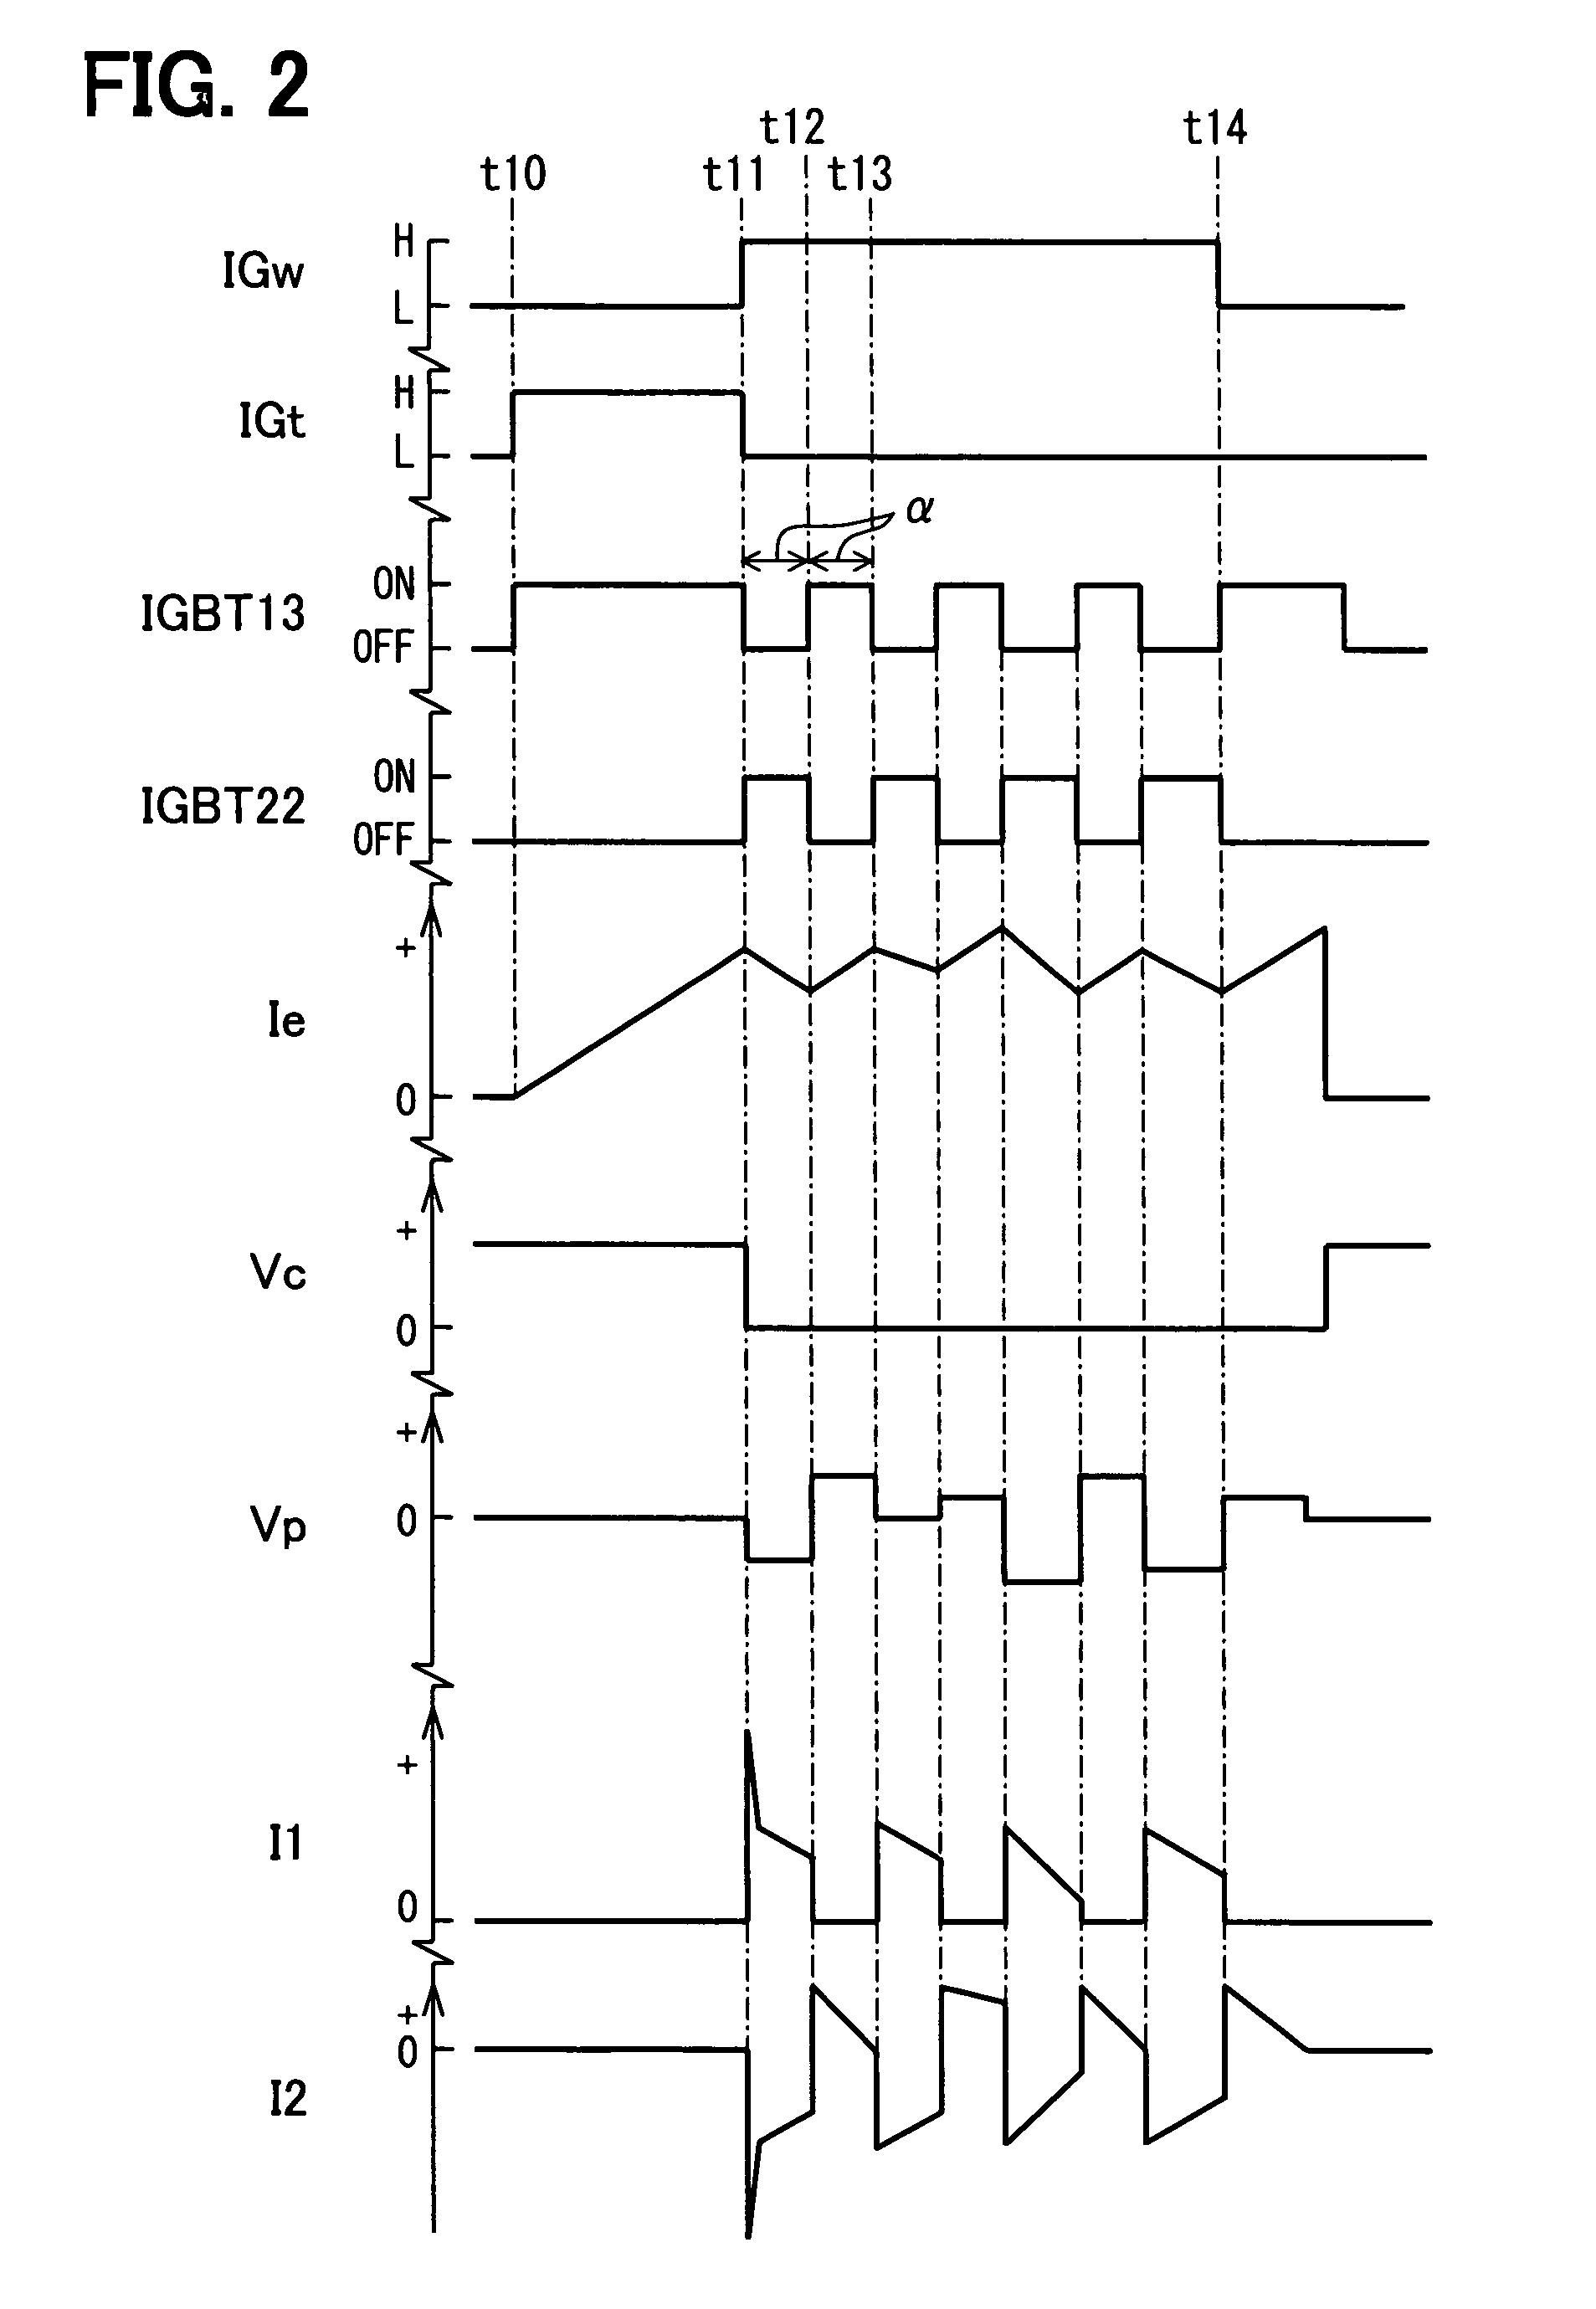 Multiple discharge ignition control apparatus and method for internal combustion engines